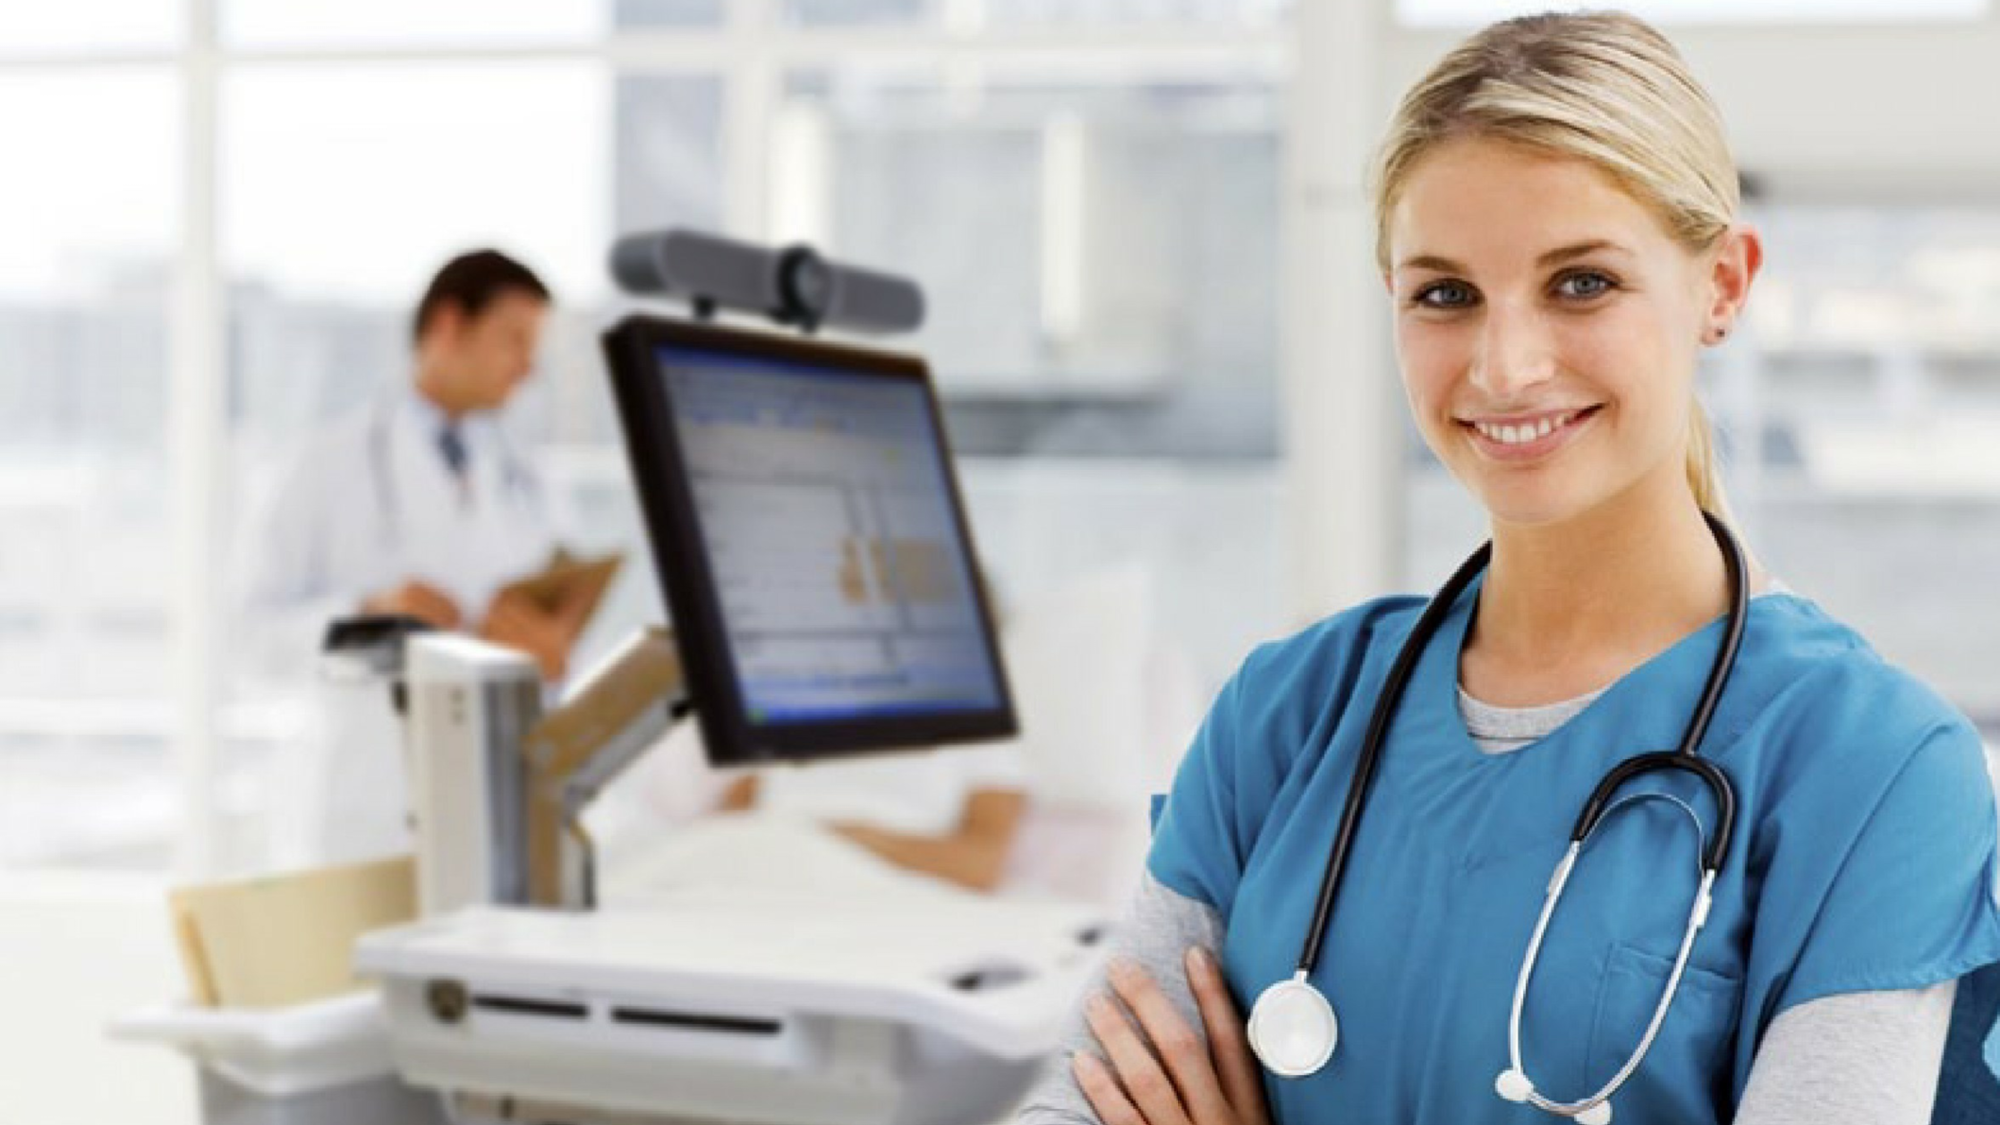 Telehealth enabled for healthcare professionals